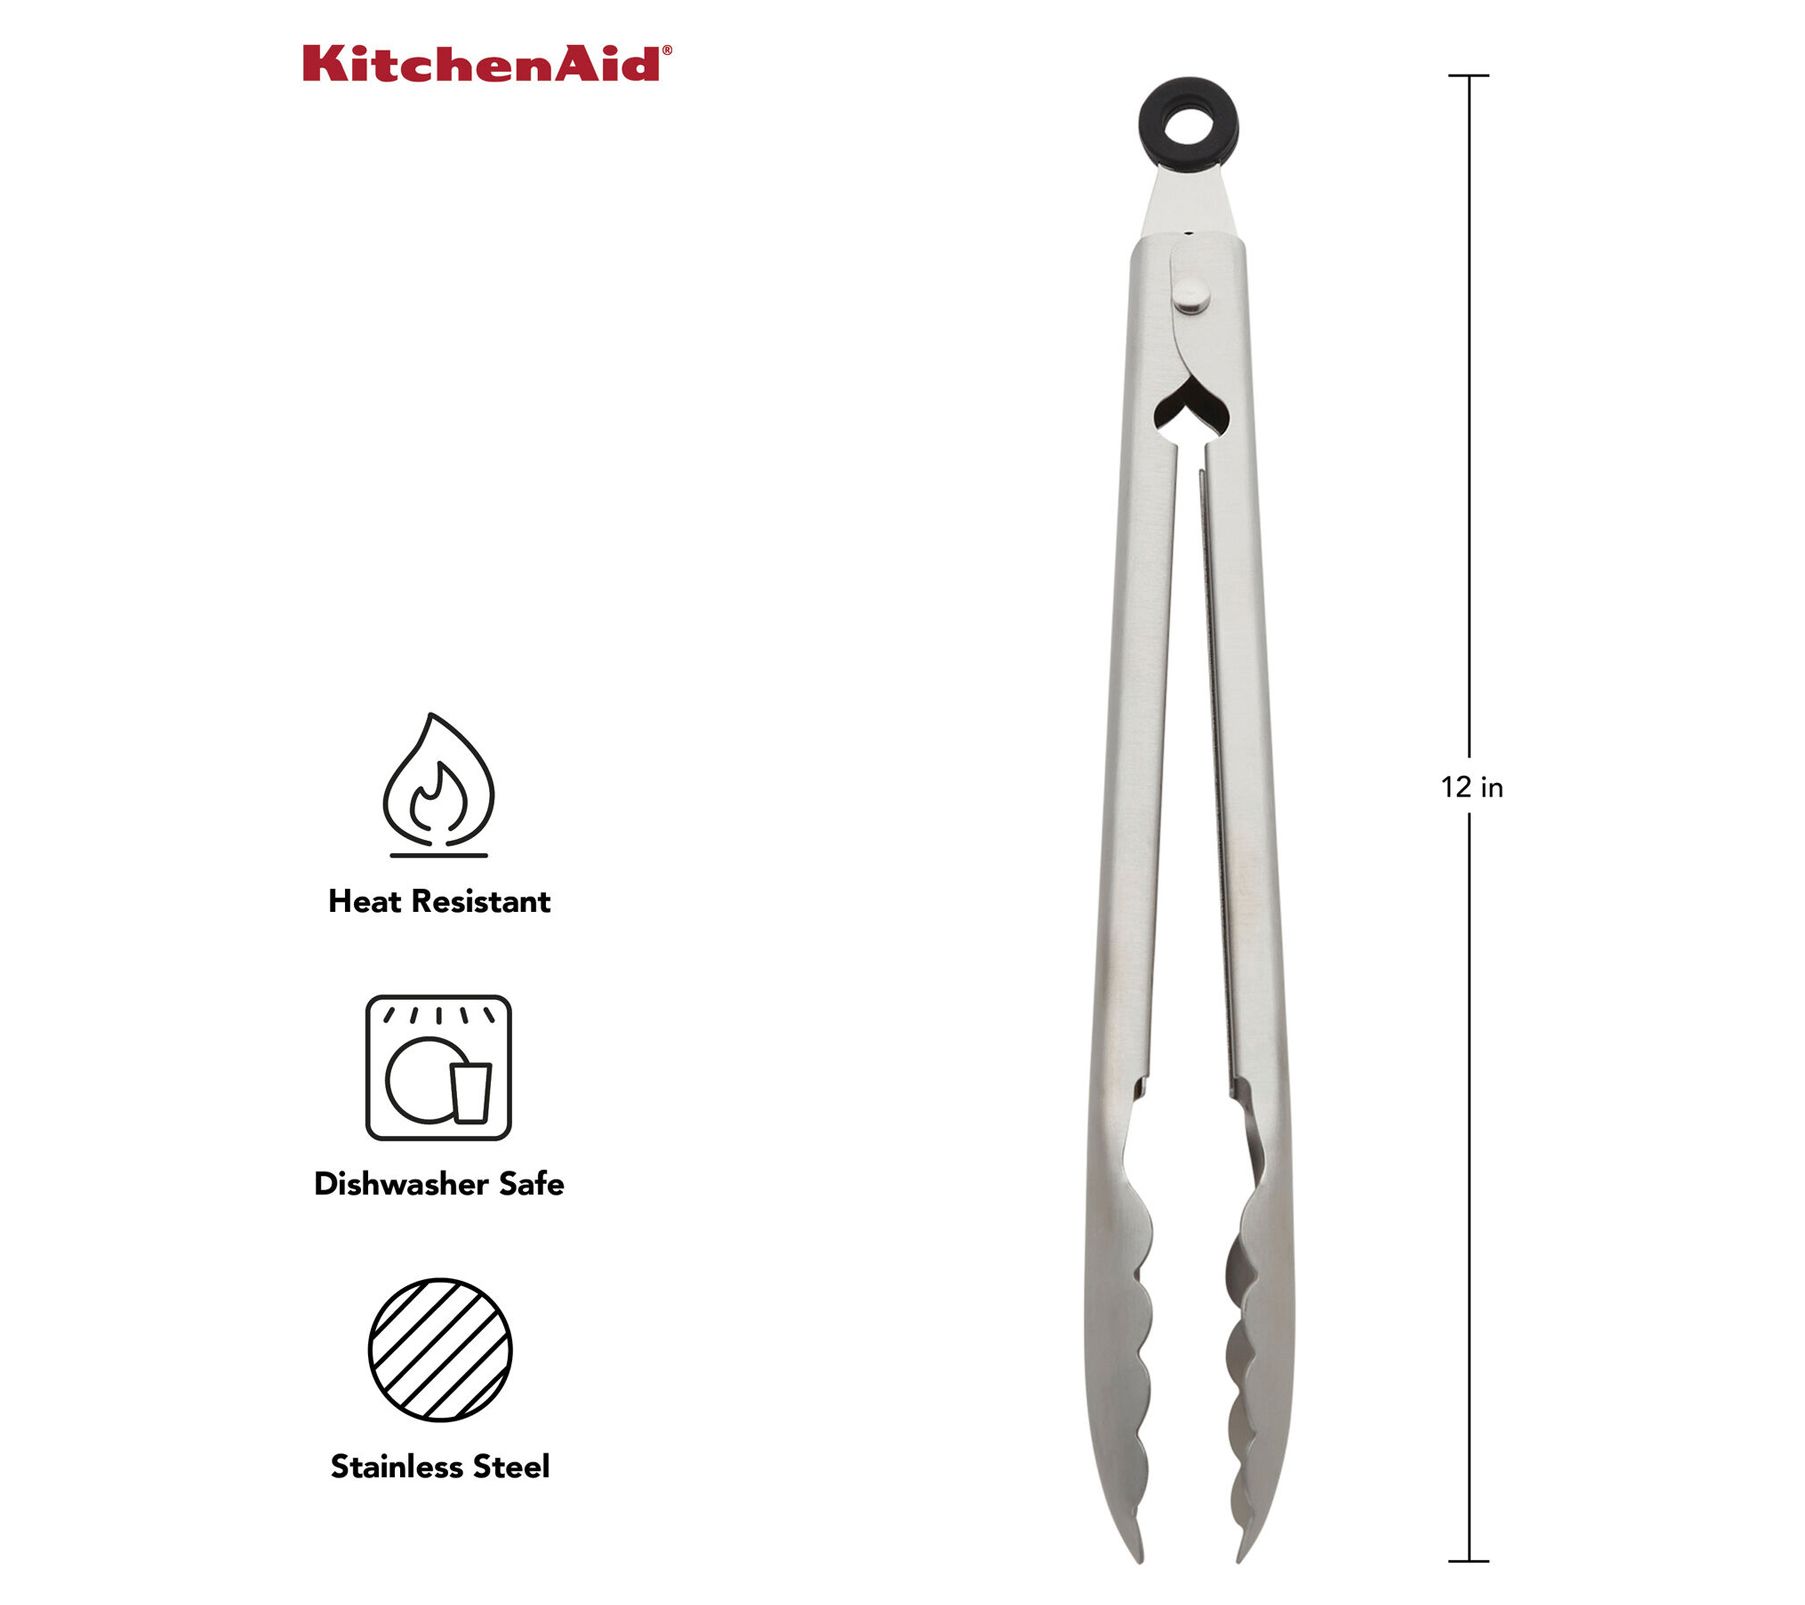 KitchenAid Silicone Tipped Stainless Steel Tongs, Black 